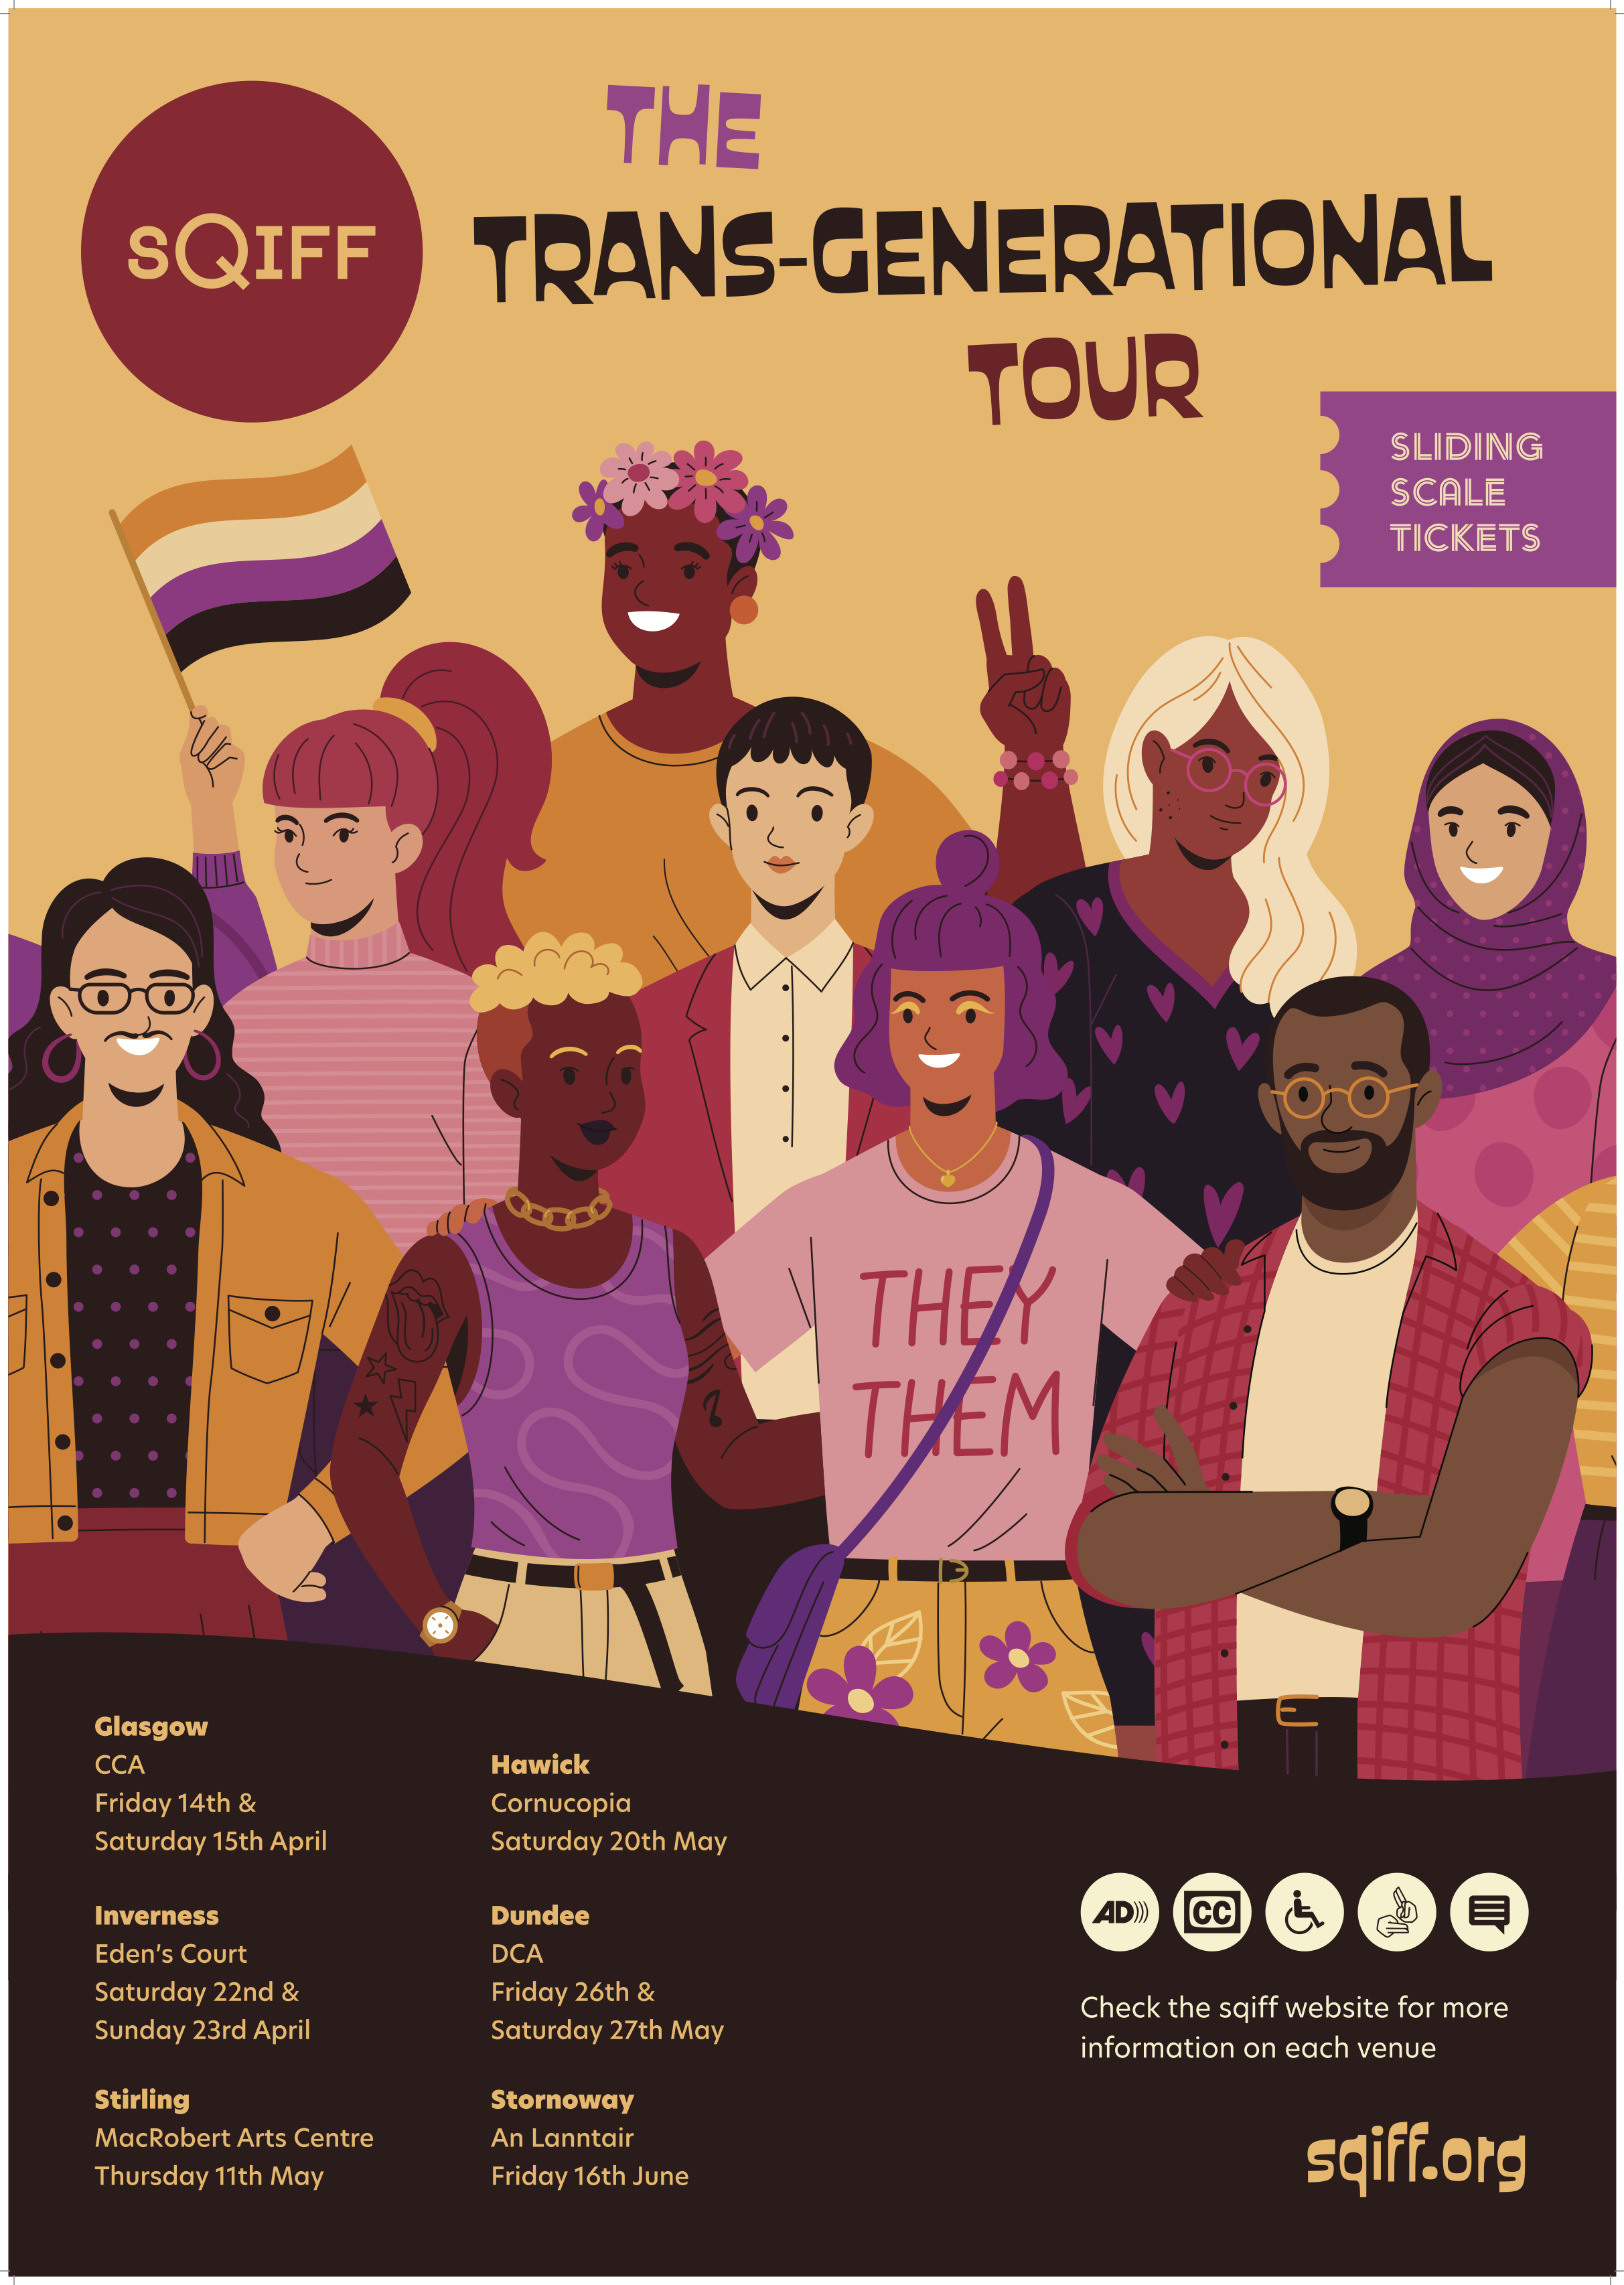 An illustrated image of a group of queer people of many genders, ages, religions and races. The background is yellow. At the top of the image is the text 'Trans Generational tour', the SQIFF logo in red, and a purple ticket with 'sliding scale tickets'. The bottom of the image reads: Glasgow, CCA, Friday 14th and Saturday 15th April; Inverness, Eden Court, Saturday 22nd and Sunday 23rd April; Stirling, MacRobert Arts Centre, Thursday 11th May; Hawick, Cornucopia, Saturday 20th May; Dundee, DCA, Friday 26th and Saturday 27th May; Stornoway, An Lanntair, Friday 16th June. To the right of this a text reads 'Check the sqiff website for more information on each venue: sqiff.org'.